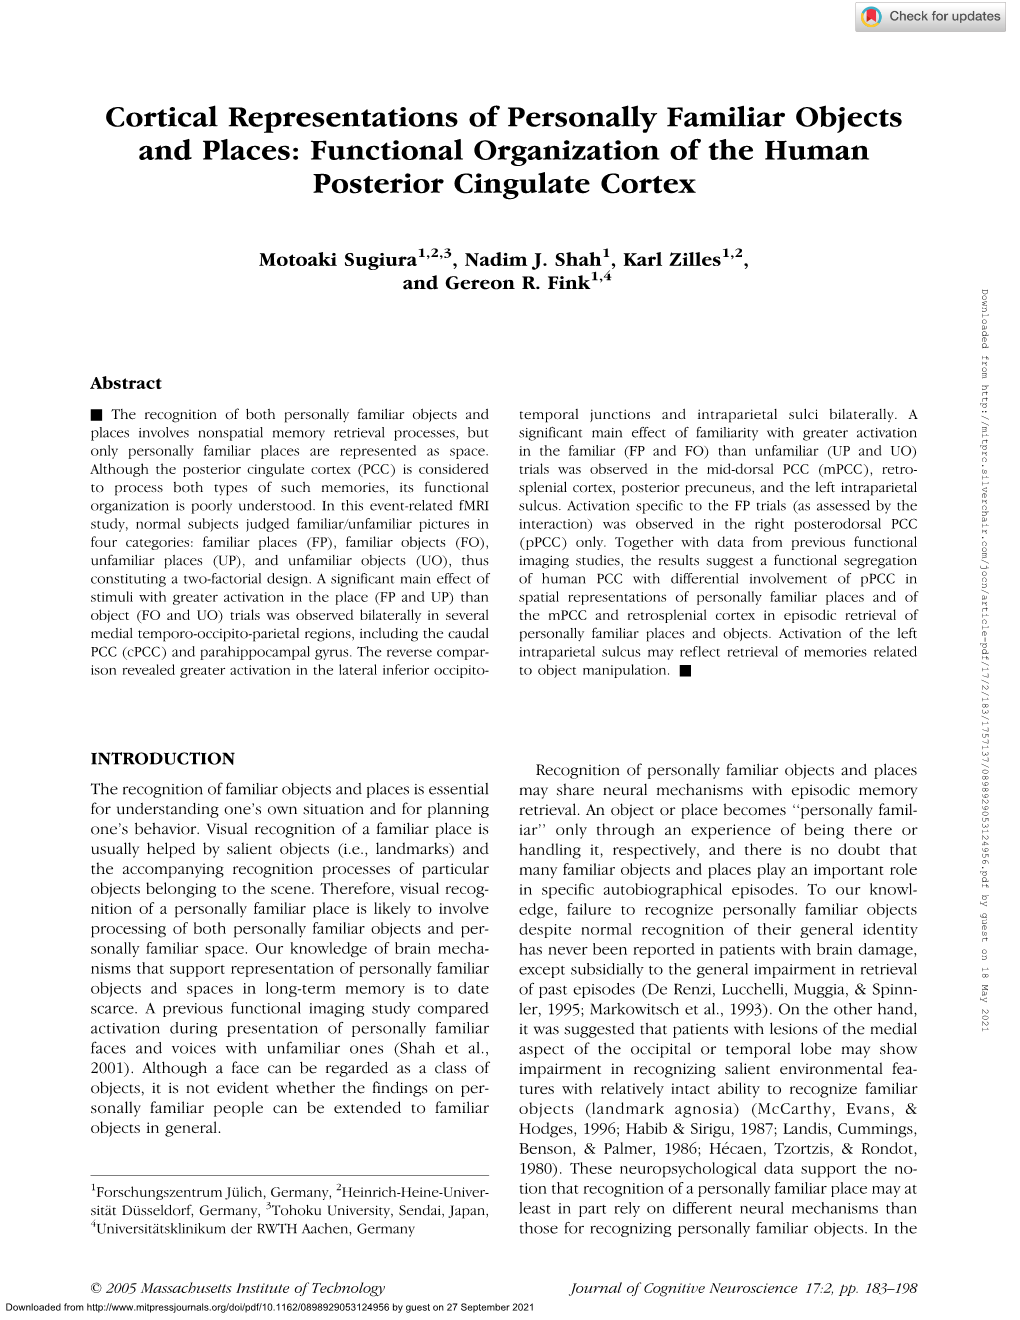 Cortical Representations of Personally Familiar Objects and Places: Functional Organization of the Human Posterior Cingulate Cortex